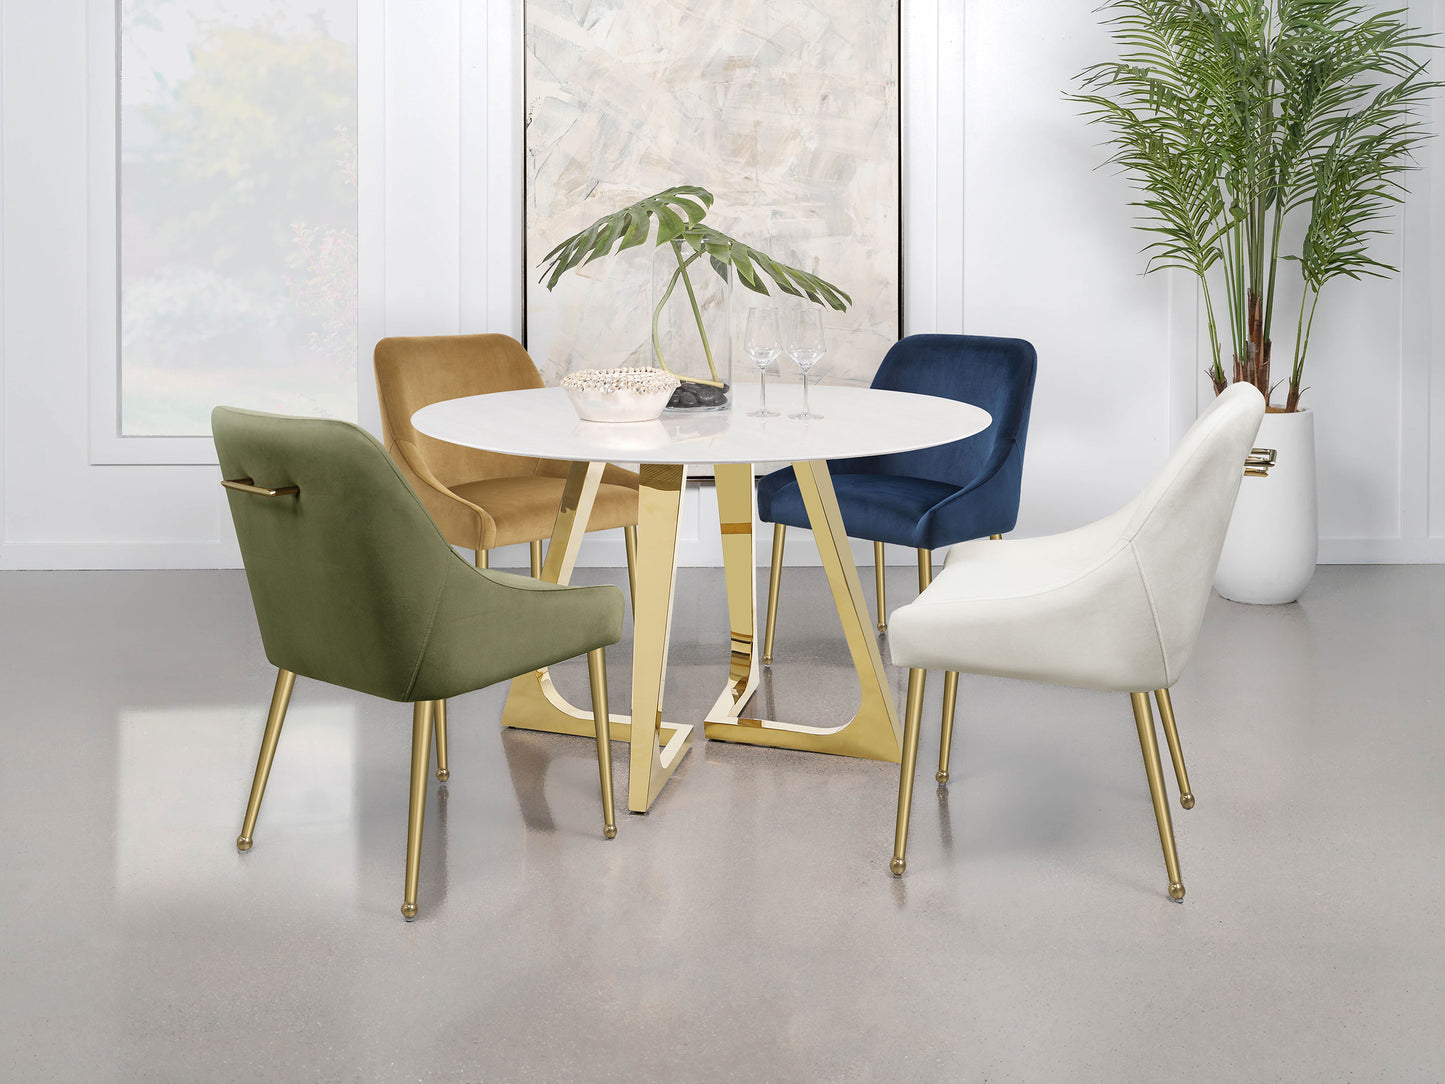 Gwynn Round Dining Table with Marble Top and Stainless Steel Base White and Gold